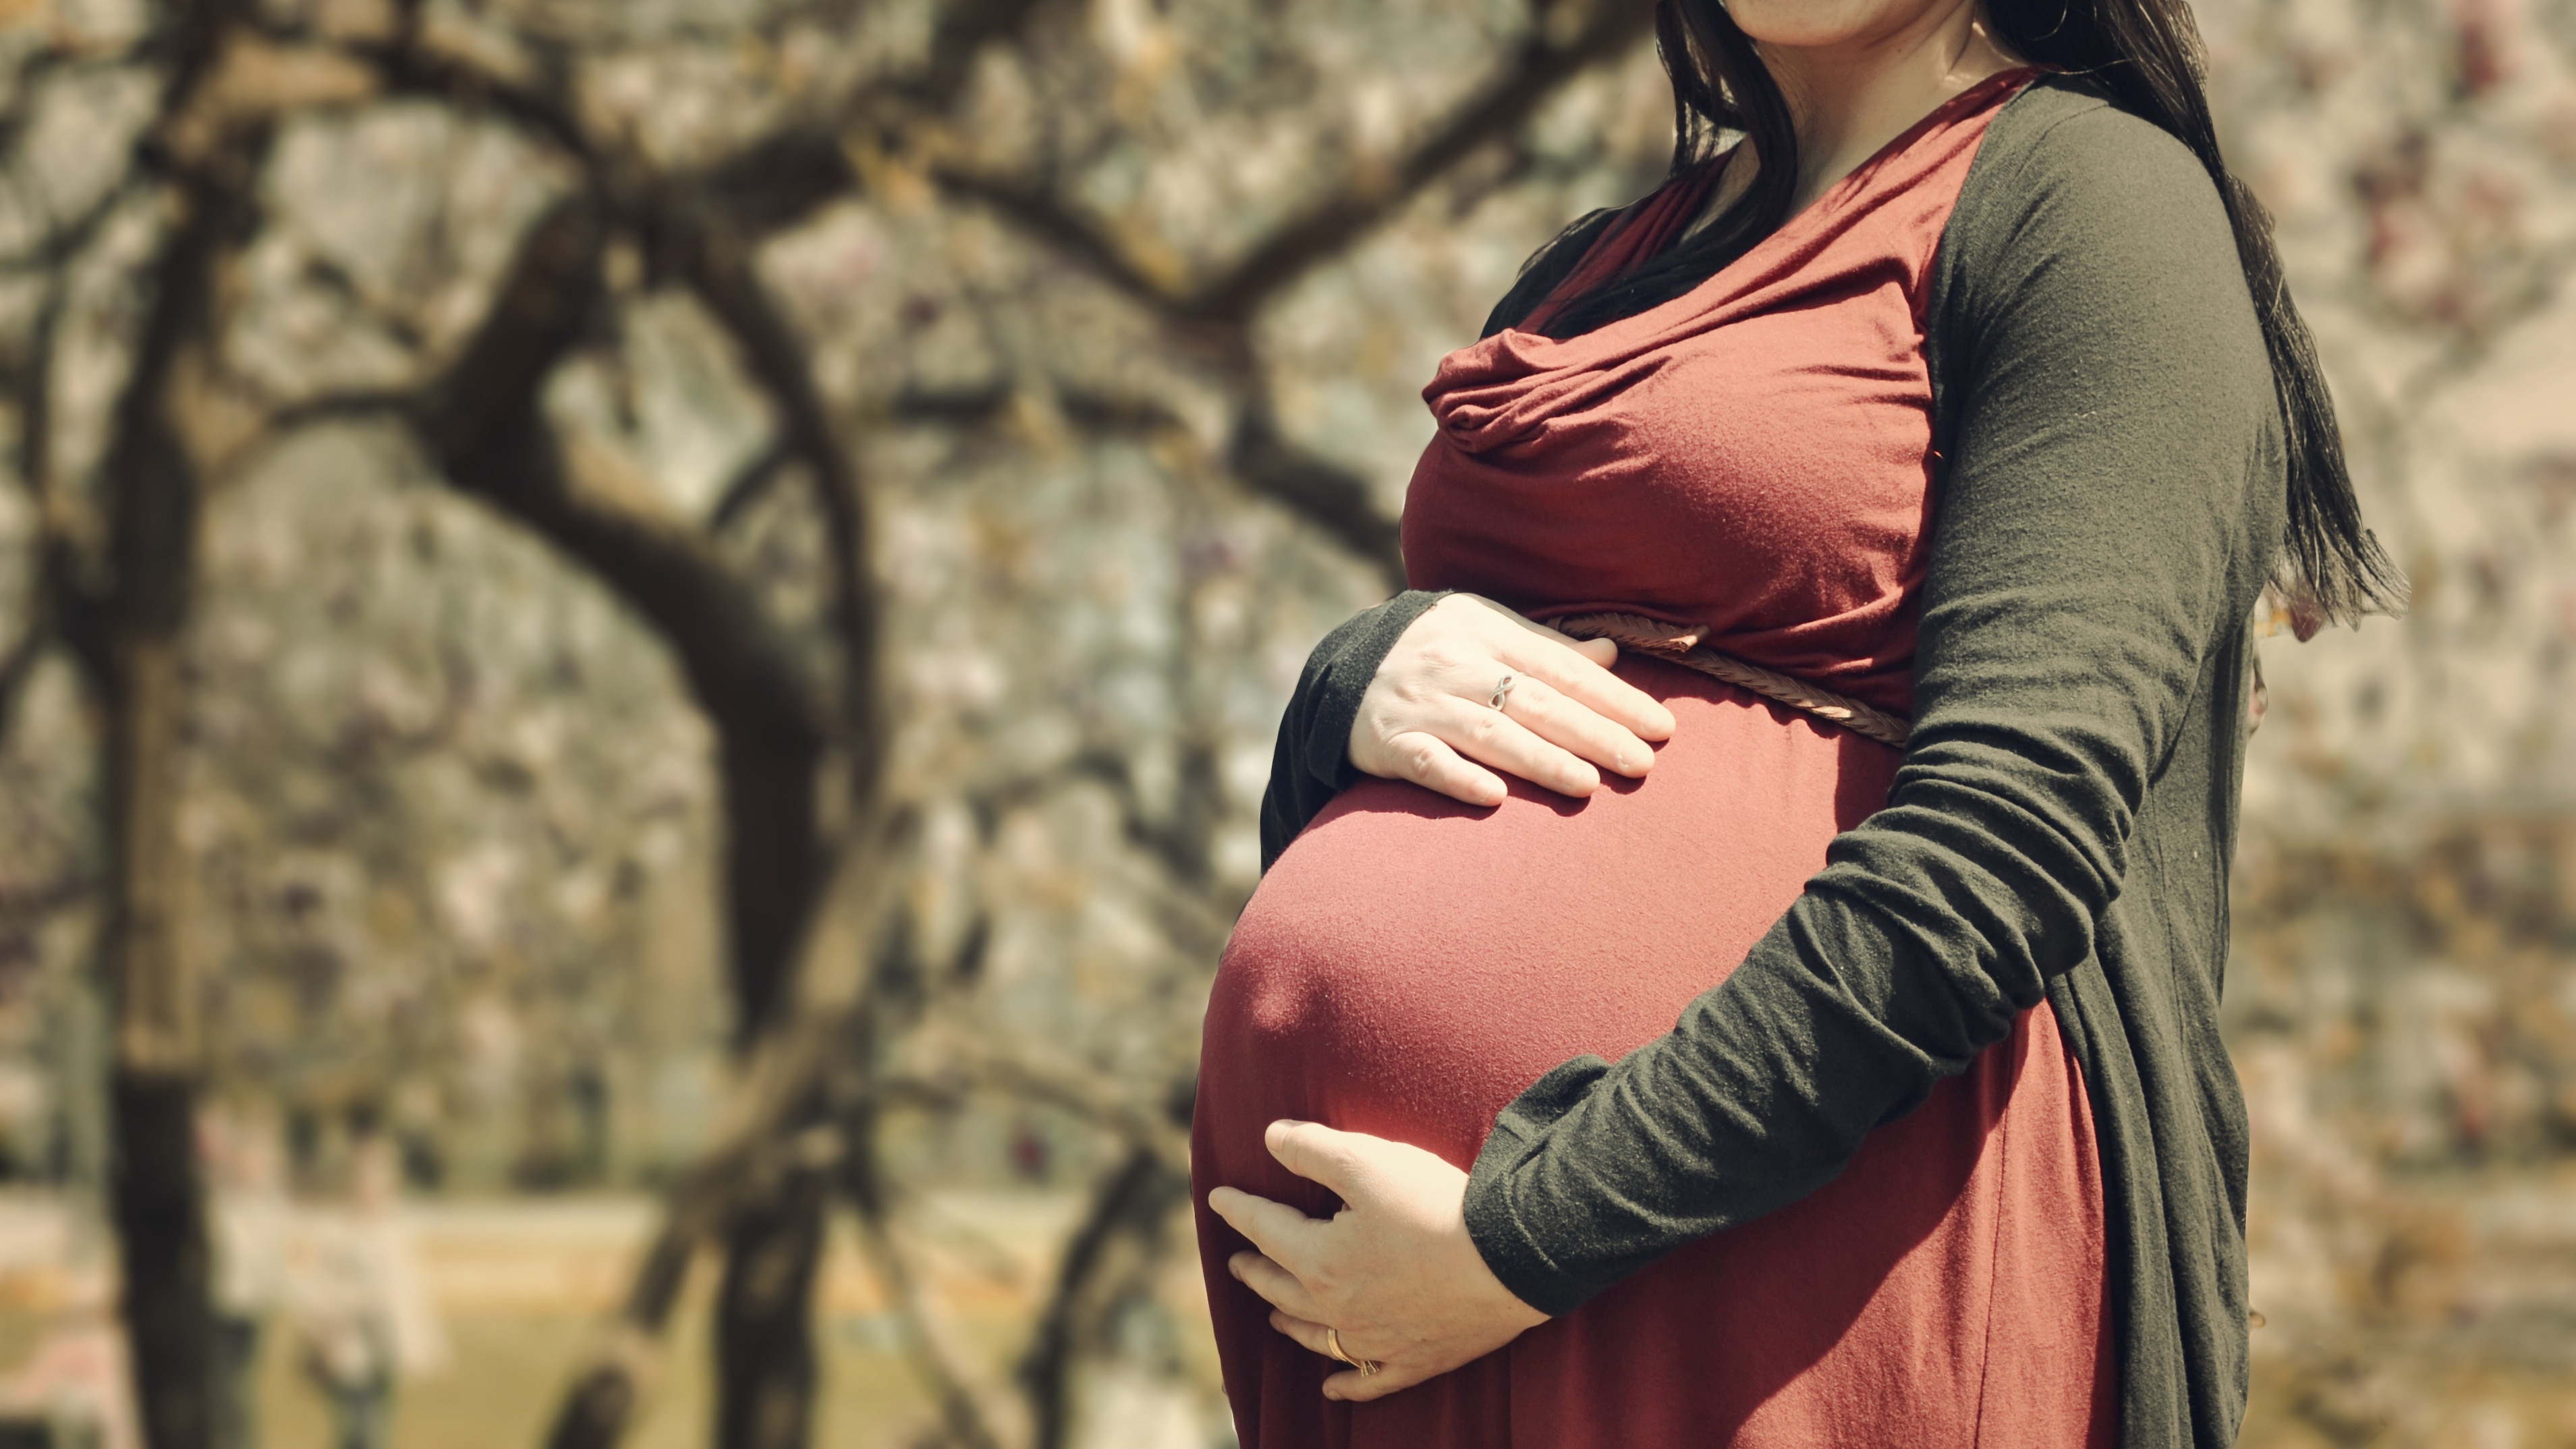 pregnant woman wearing brown jacket and red dress